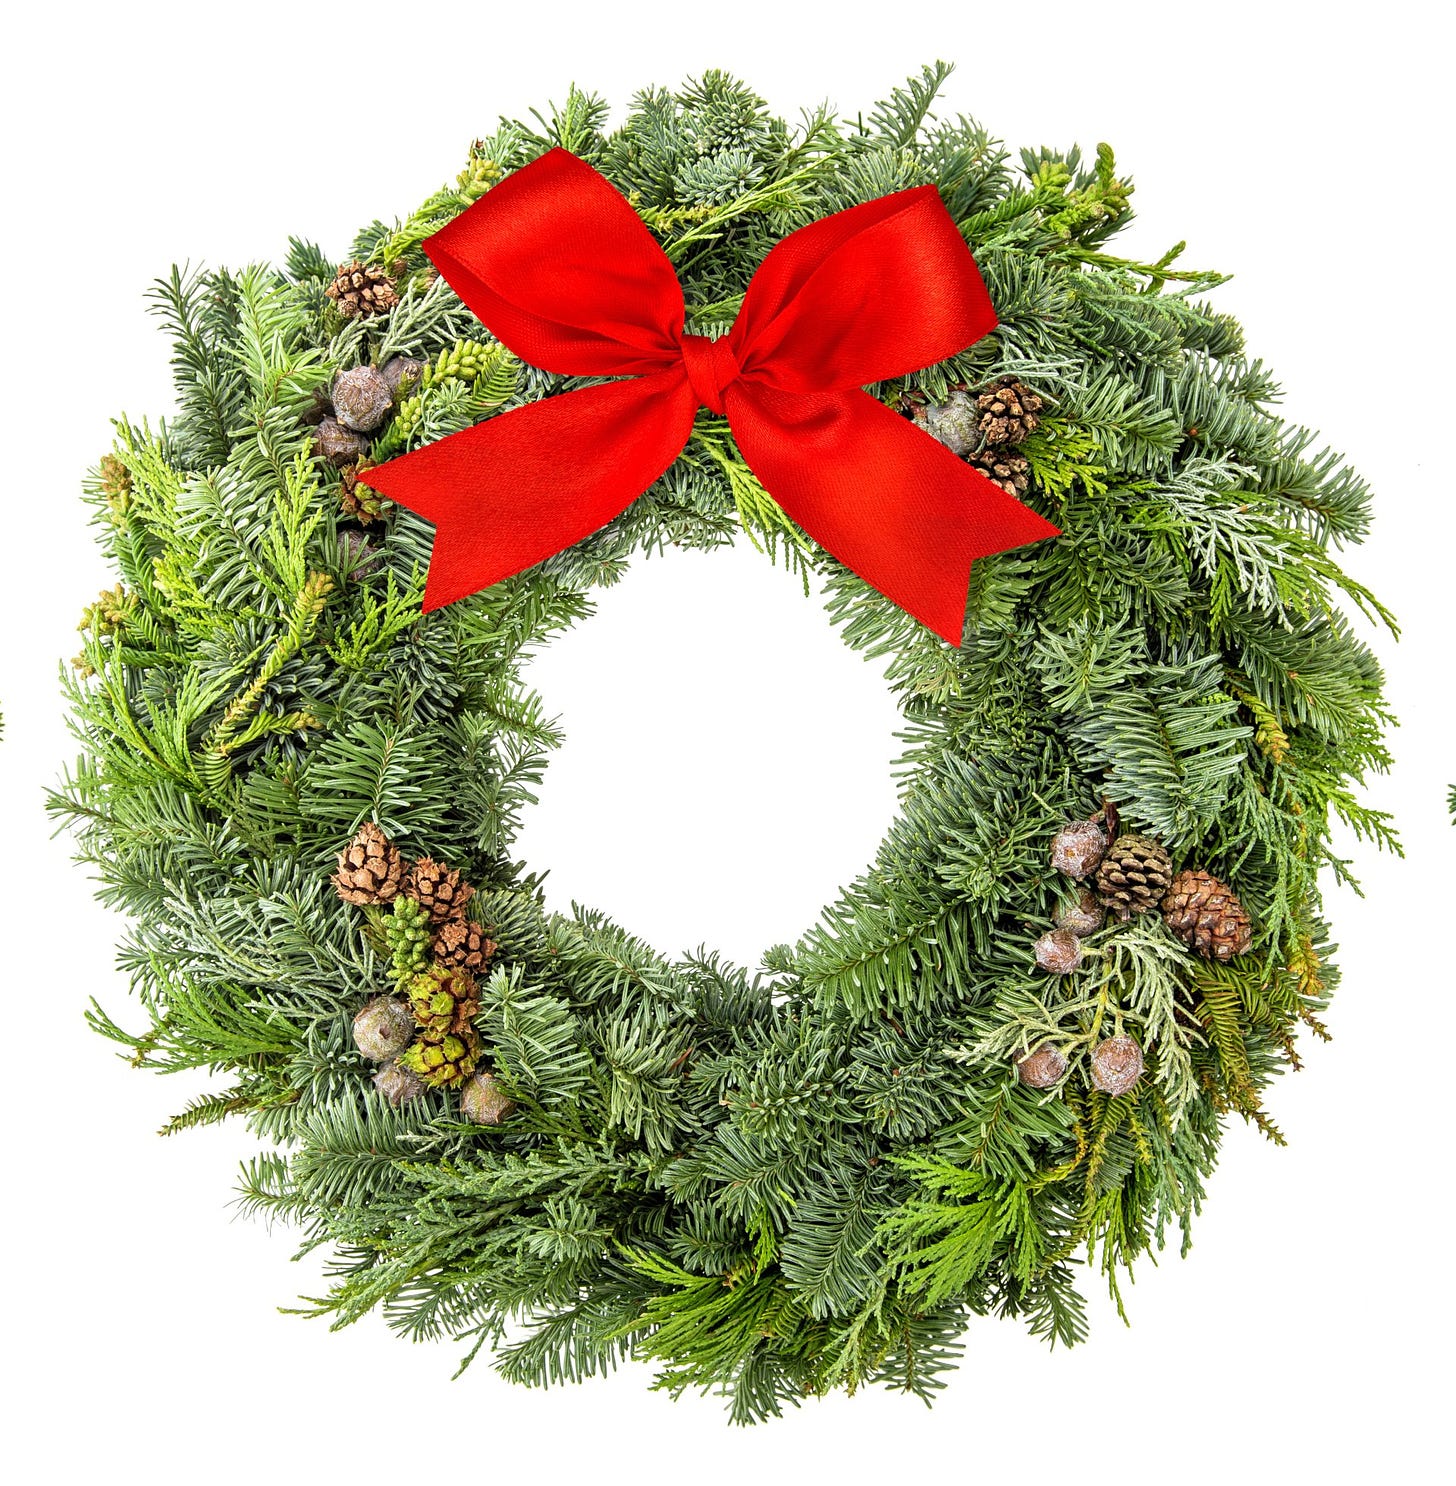 Christmas Wreath Options and Pricing | Willey's Christmas Trees